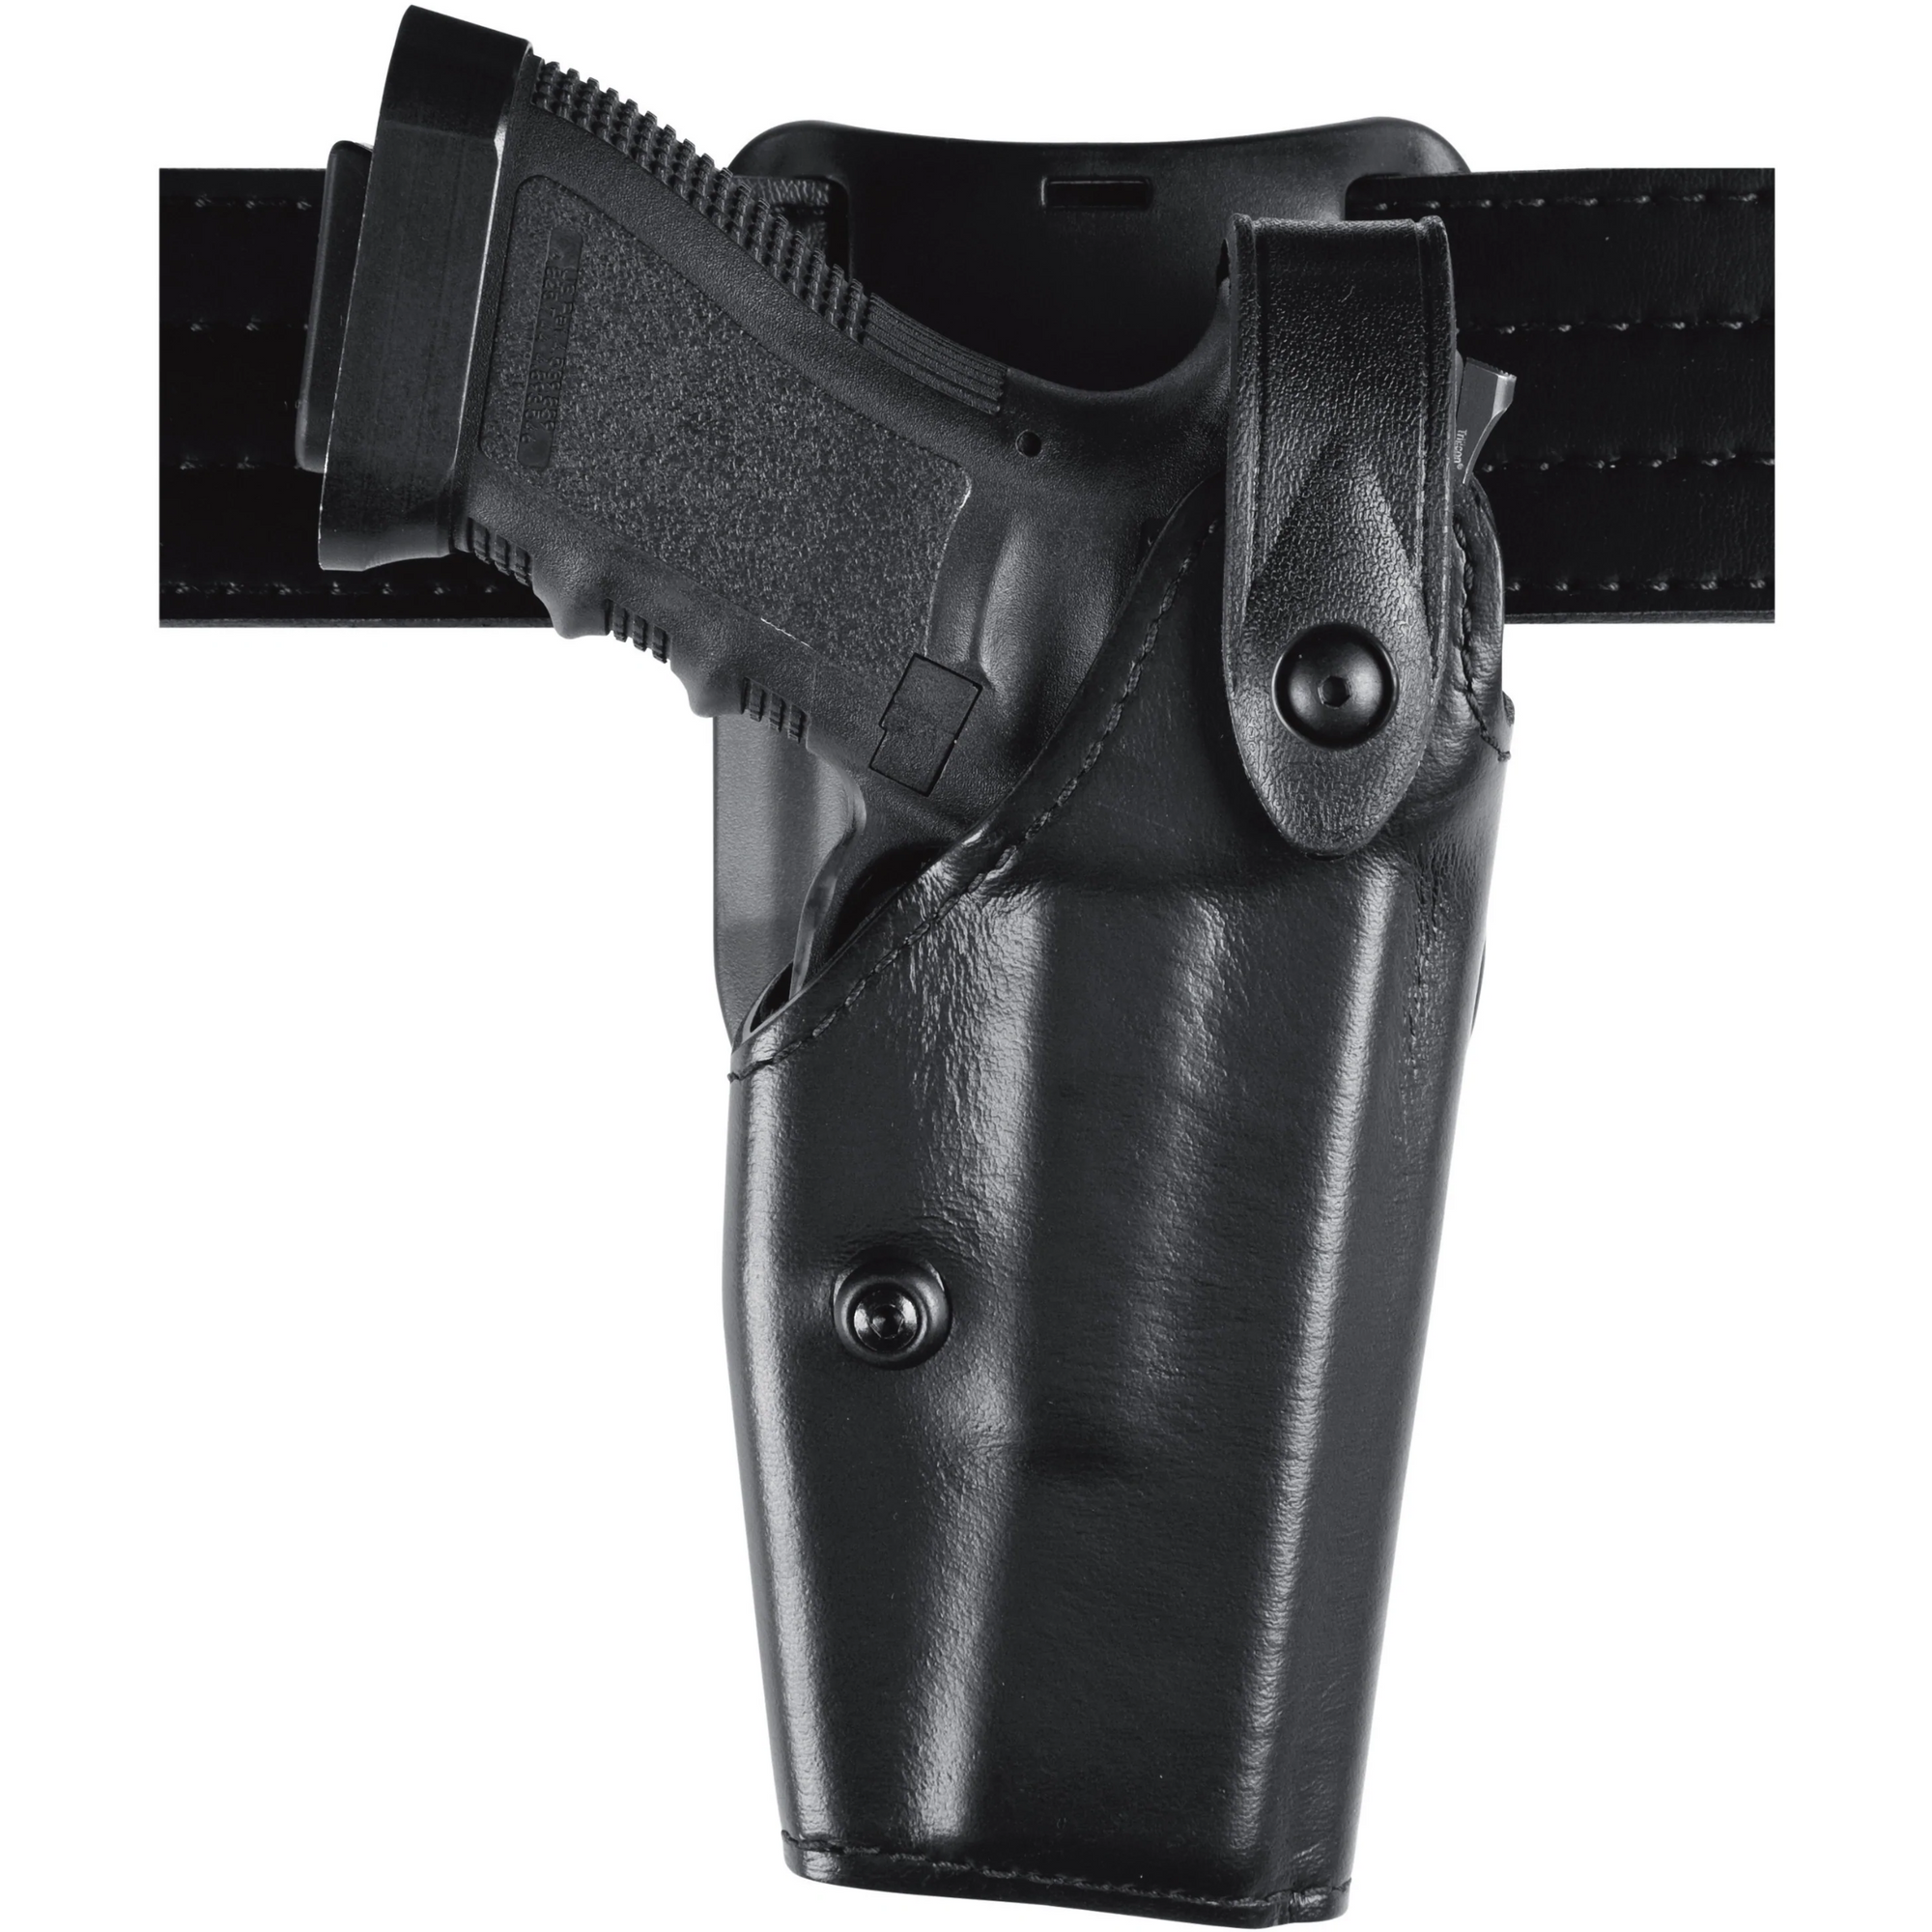 Model 6285 Sls Low-ride, Level Ii Retention Duty Holster For Smith & Wesson M&p 9